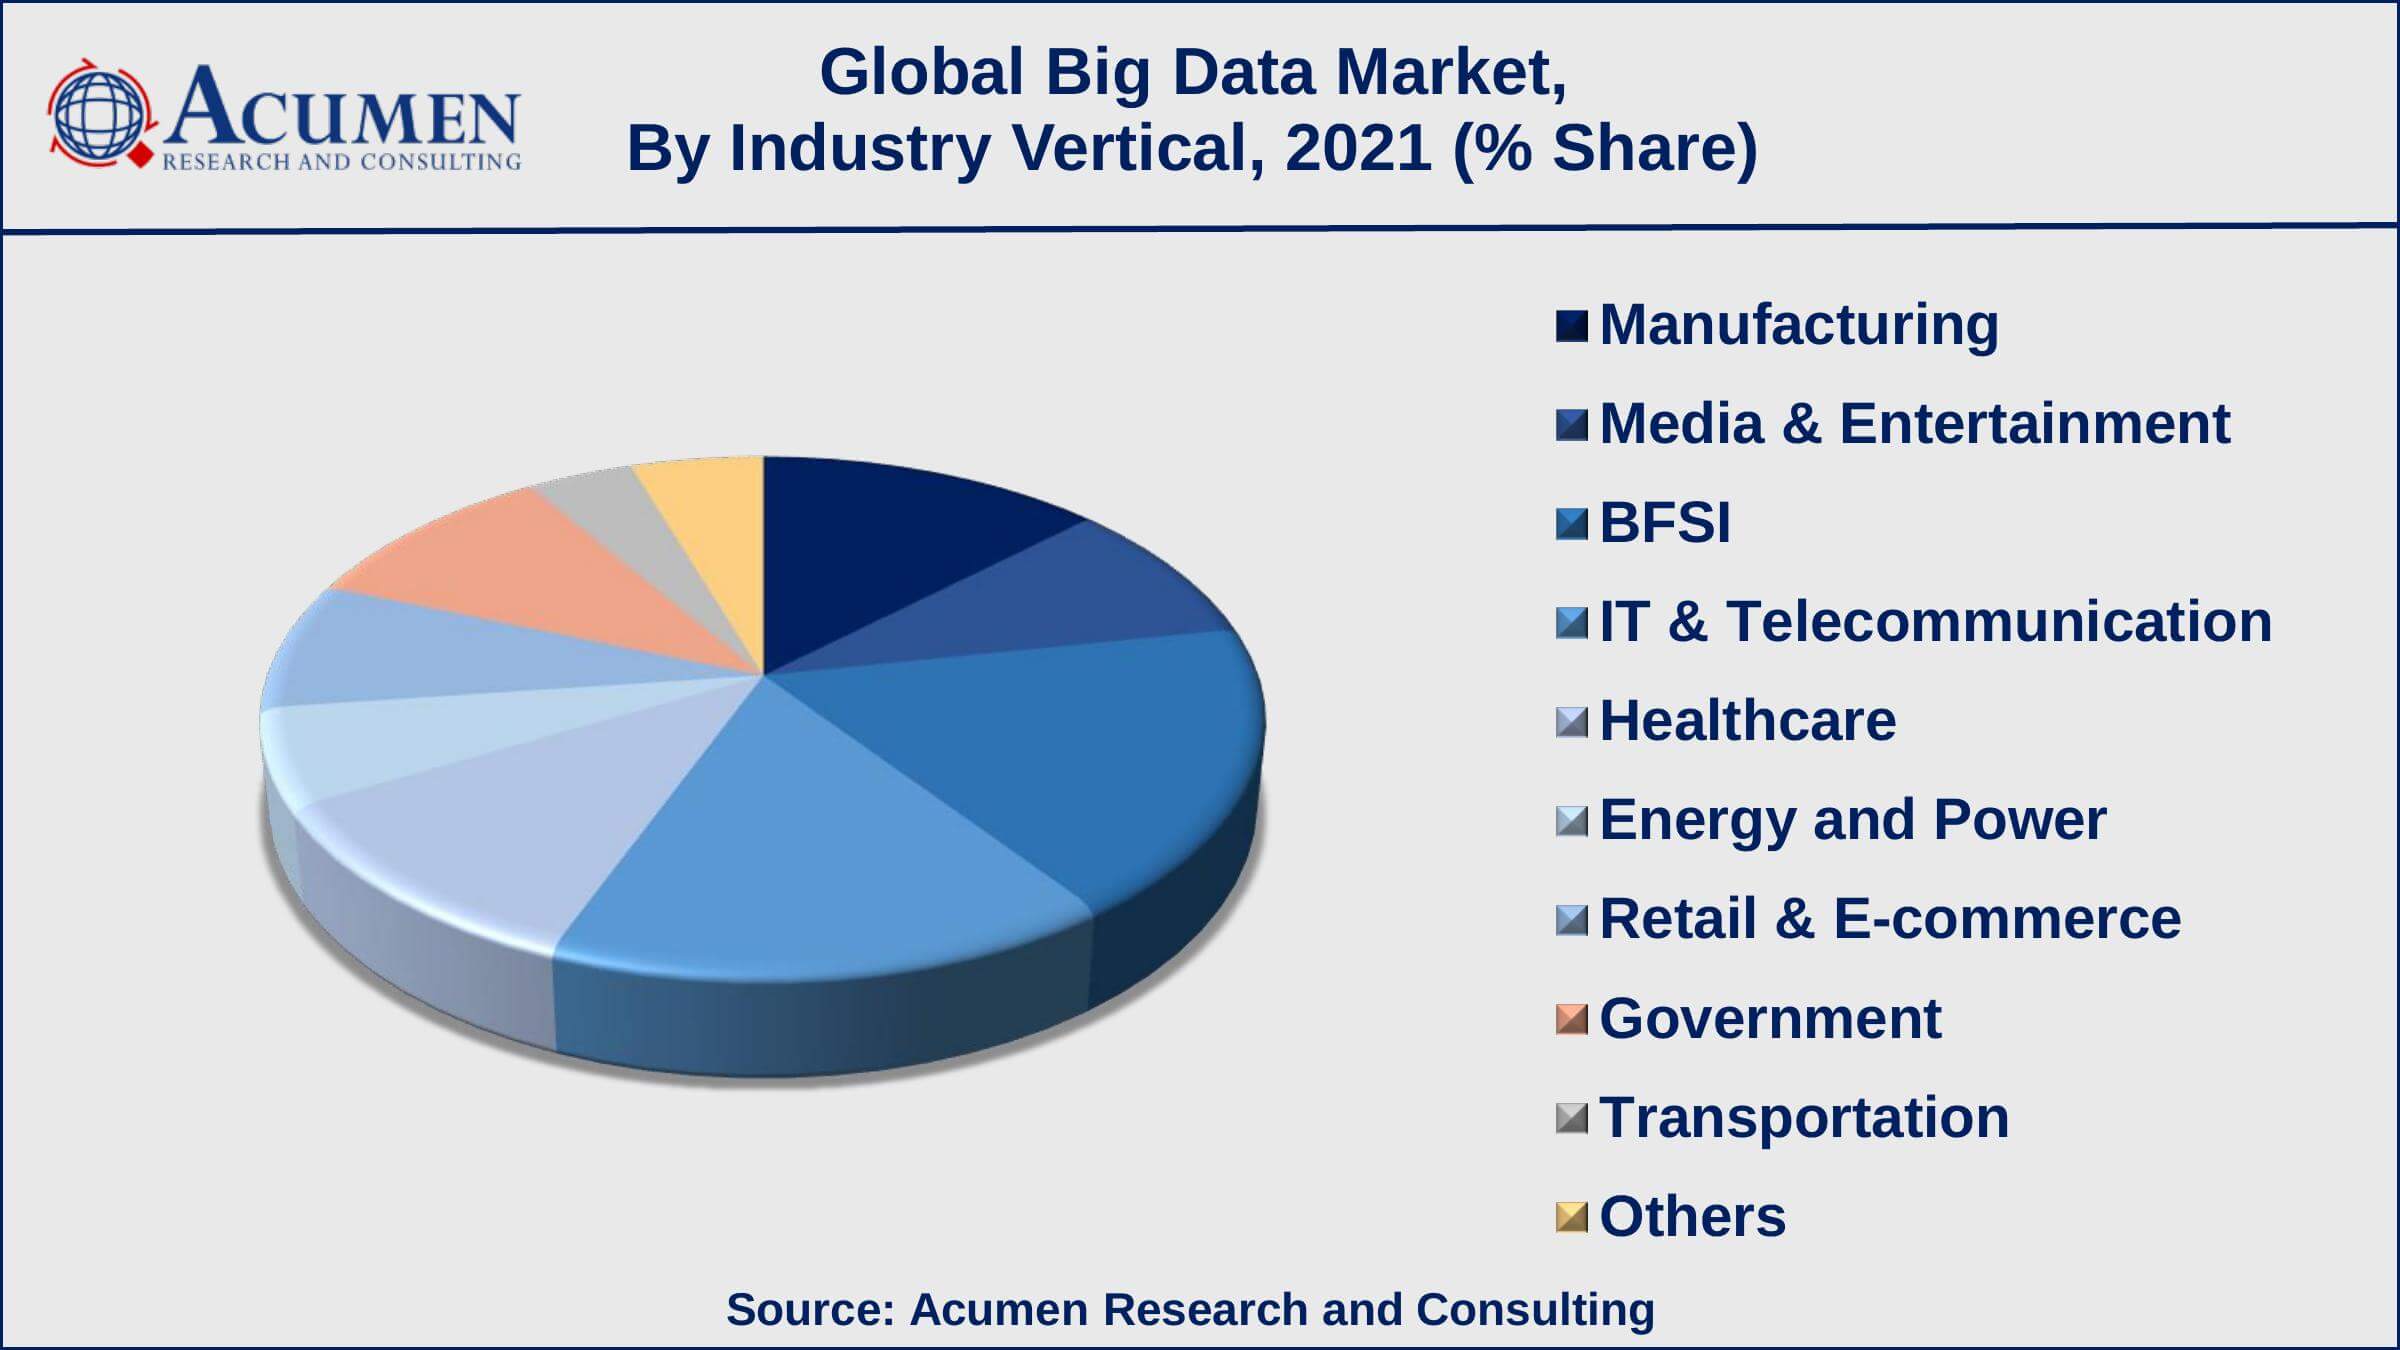 Growing adoption of IoT and Hadoop is a prominent big data market trend that drives the industry demand